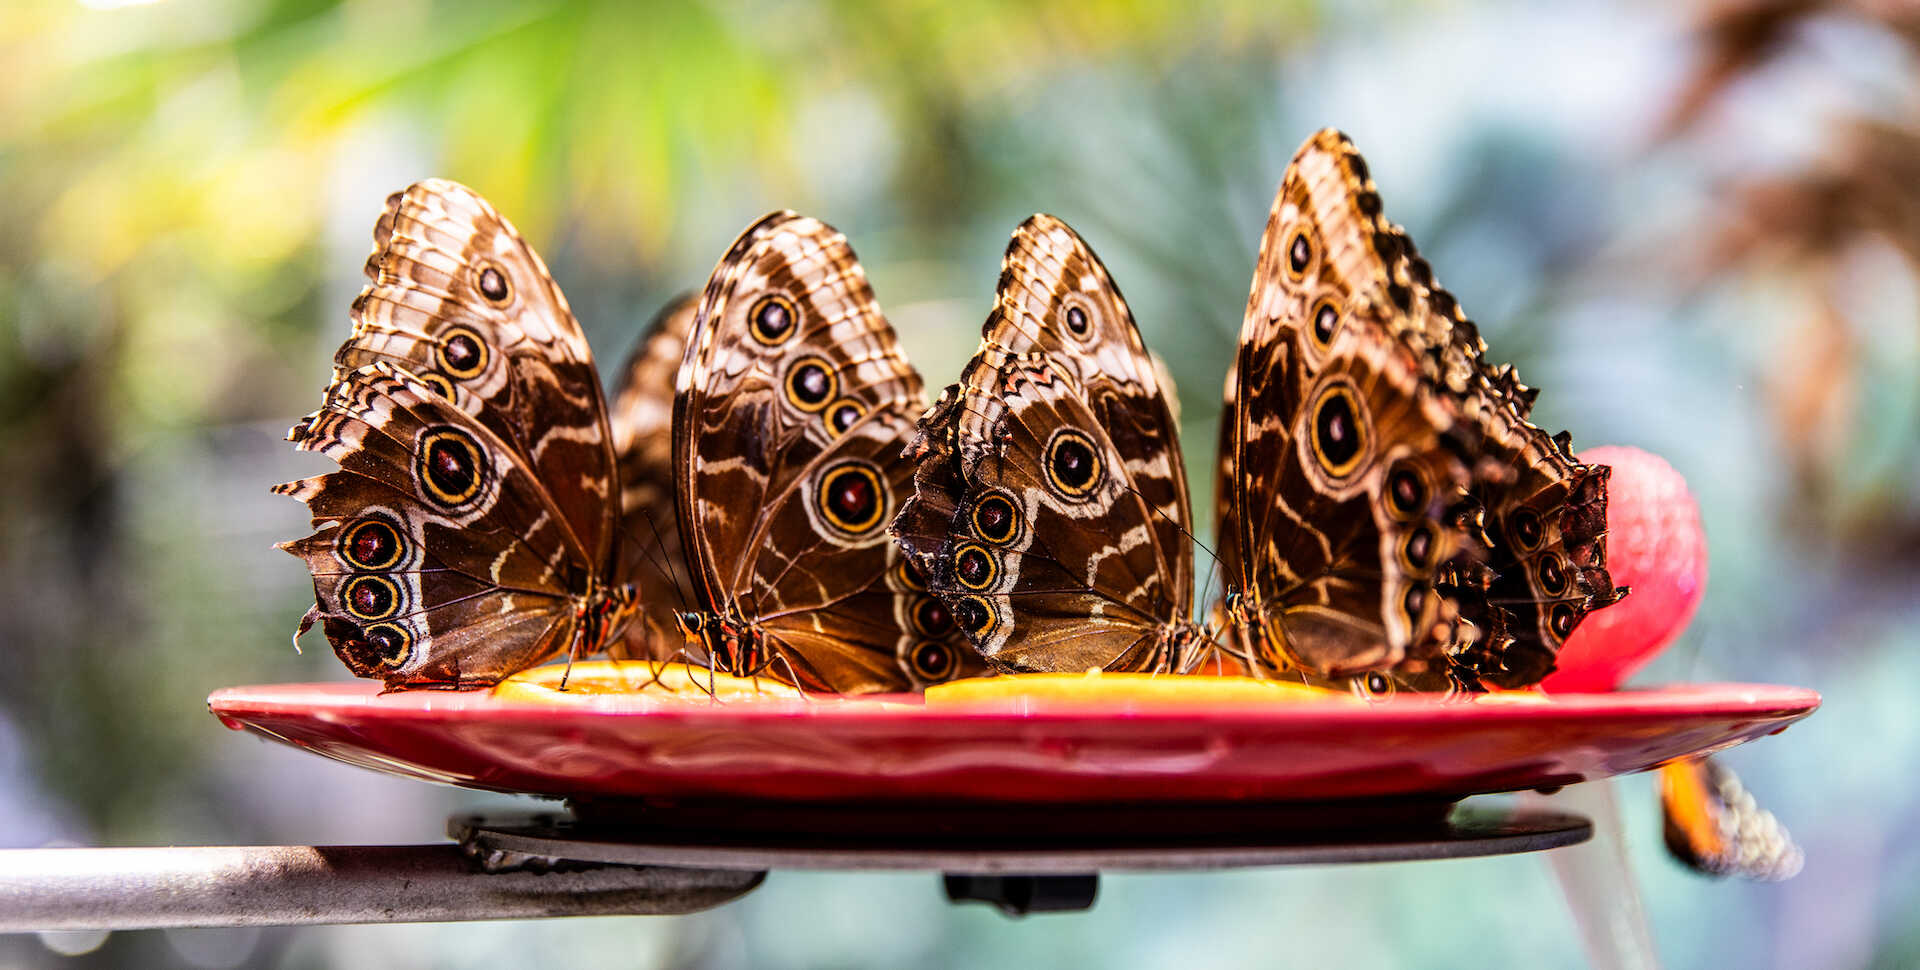 A group of brown owl butterflies feasts on ripe oranges in the rainforest. 